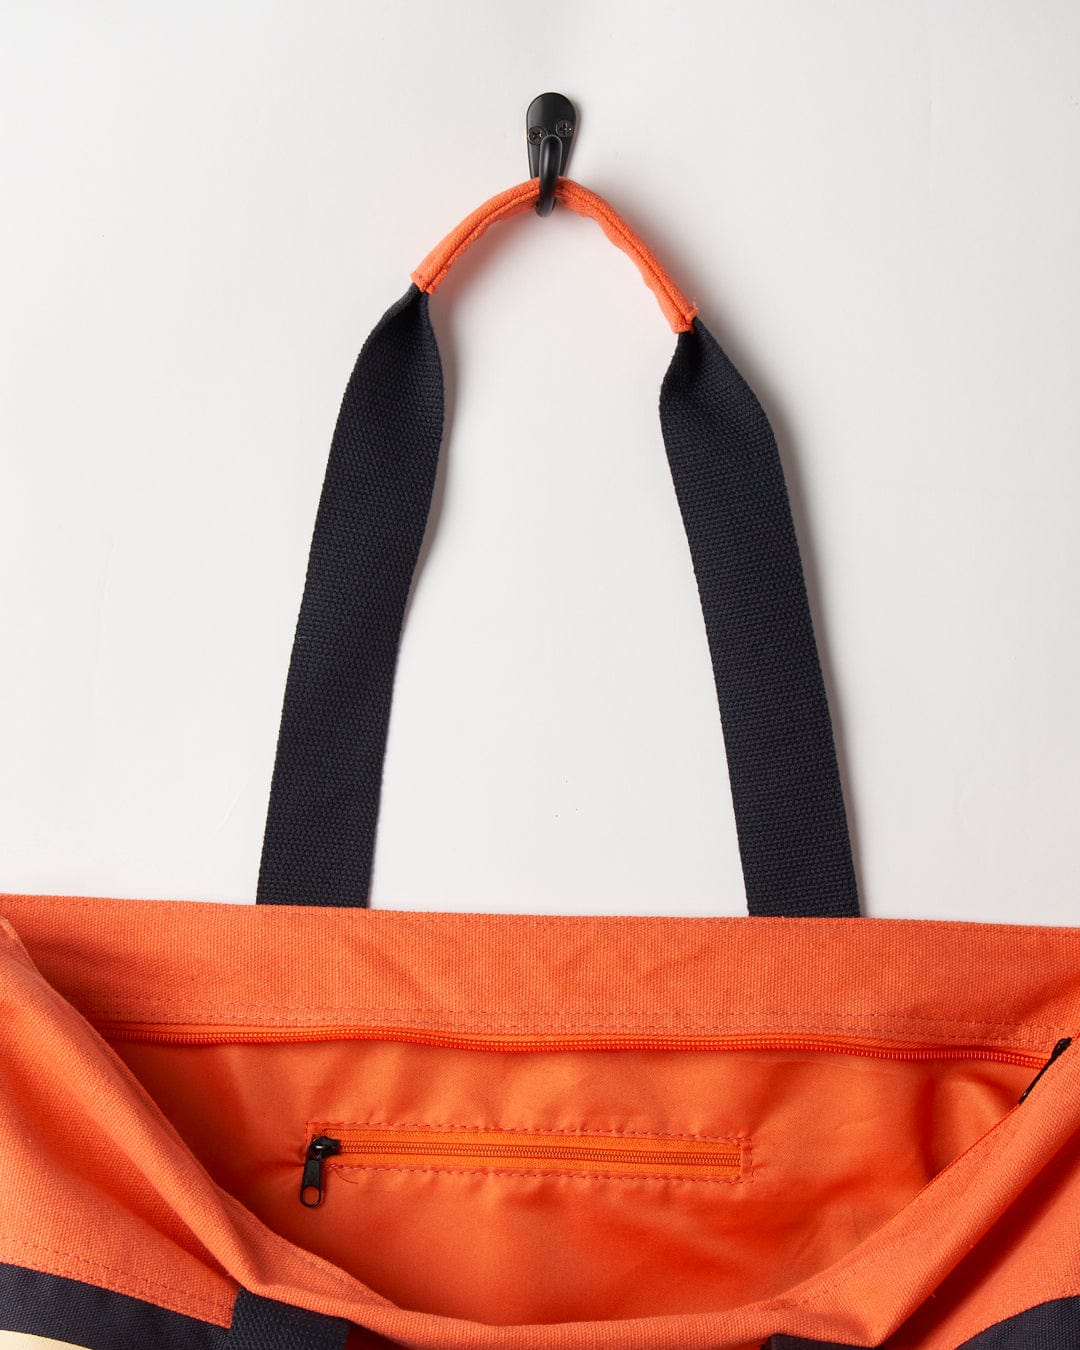 A close-up view of an open coral Saltrock Cora Retro Beach Bag with durable branding and an adjustable strap hanging from a hook.